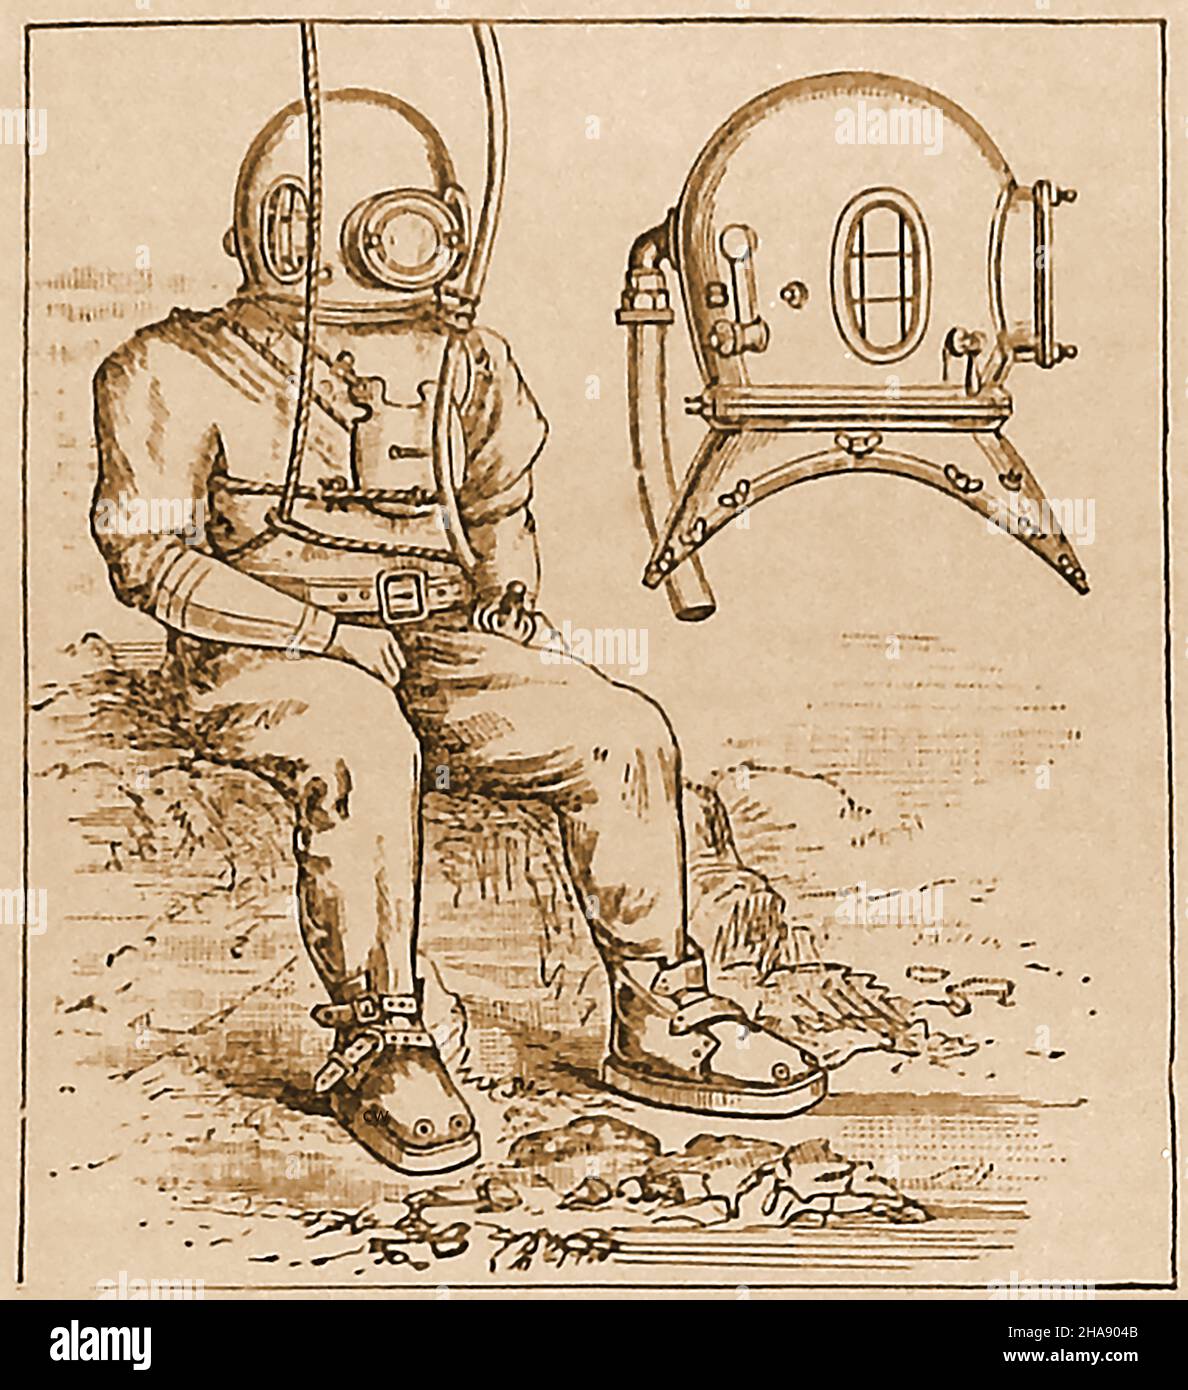 A late 19th century illustration of a diving -dress (Diving suit) and helmet designed by Siebe, Gorman & Co.. The British company  developed commercial diving  and underwater  breathing equipment and engaged in  salvage projects. The company advertised itself as 'Submarine Engineers' was founded by Augustus Siebe , a German-born British engineer. Stock Photo